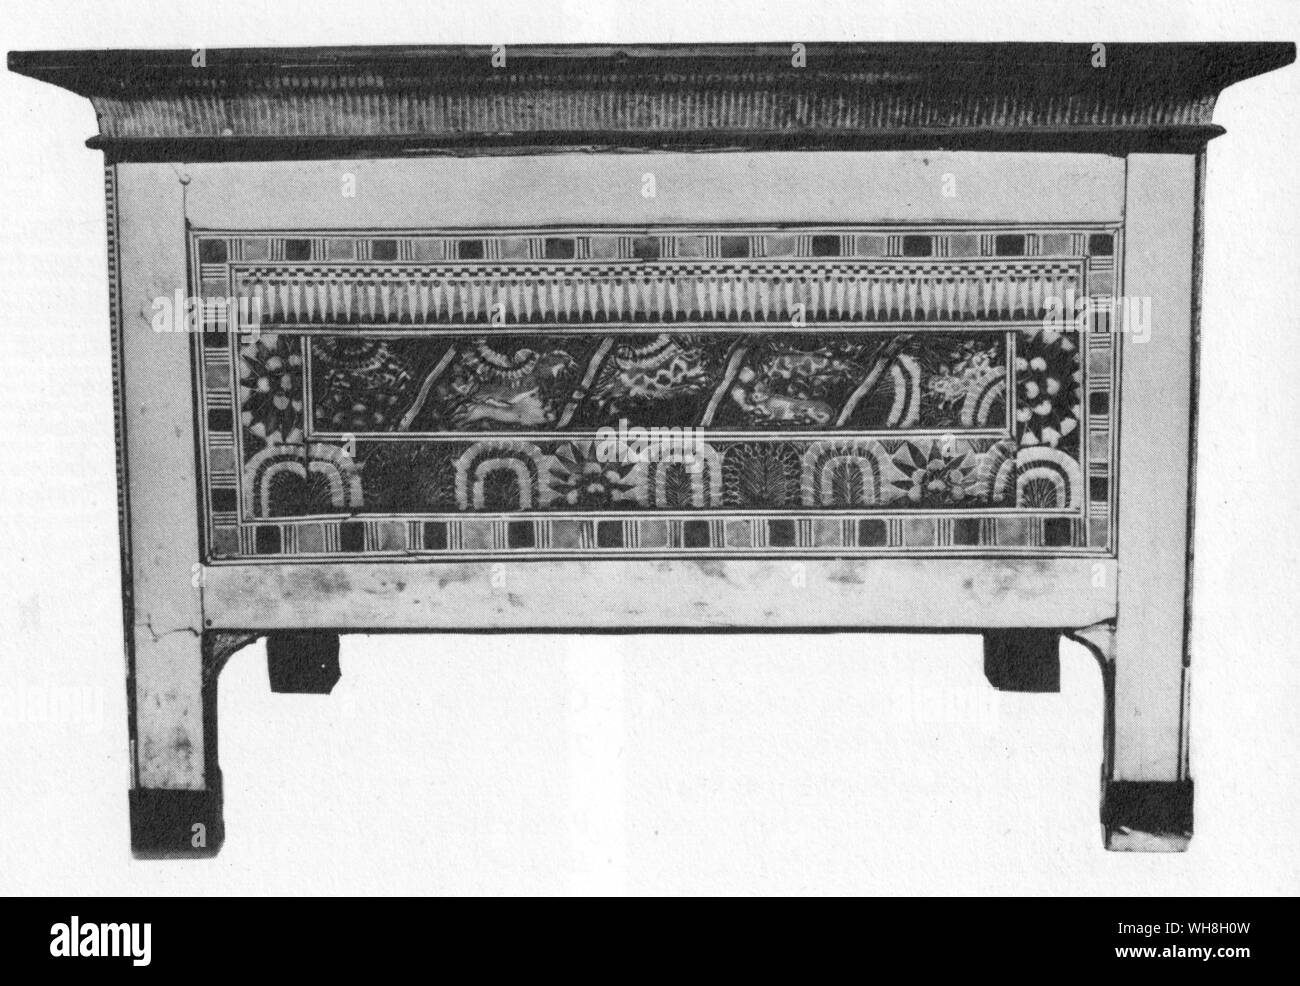 Ornamented chest found in Tutankhamun's tomb. The Treasures of Tutankhamen, The Exhibition Catalogue by  I E S Edwards, page 105. Stock Photo